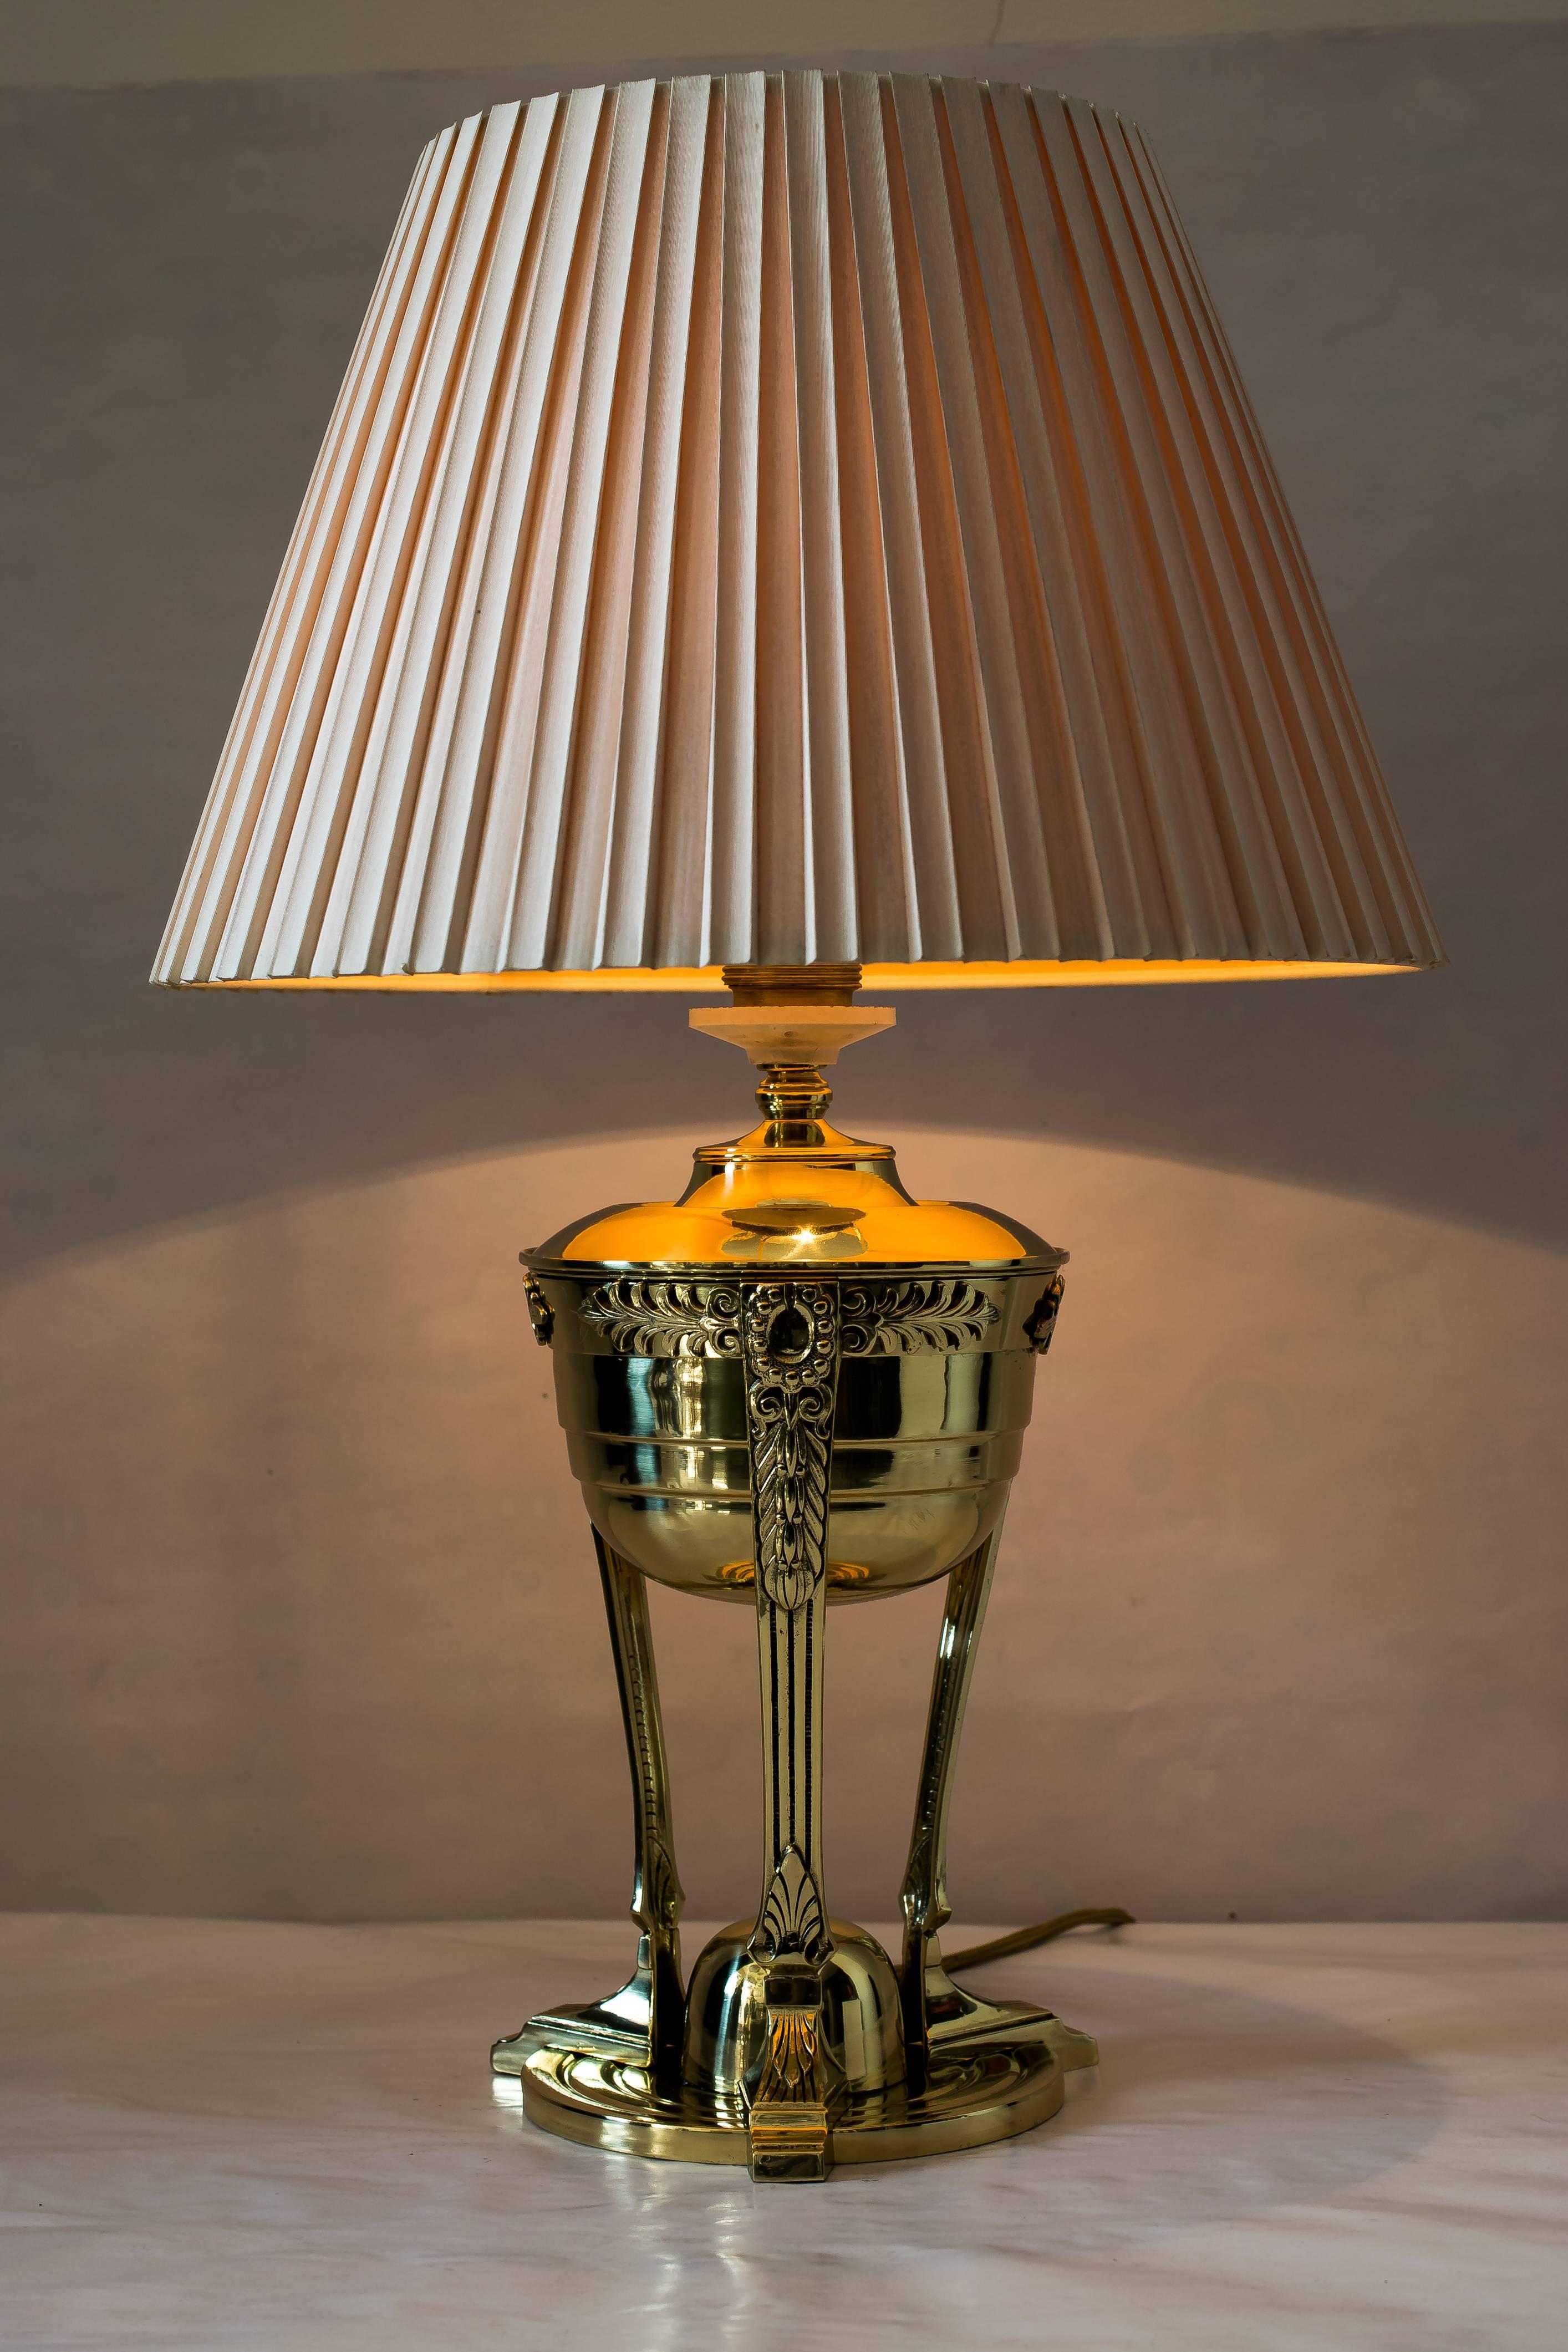 Art Nouveau table lamp with original fabric shade
polished and stove enamelled.